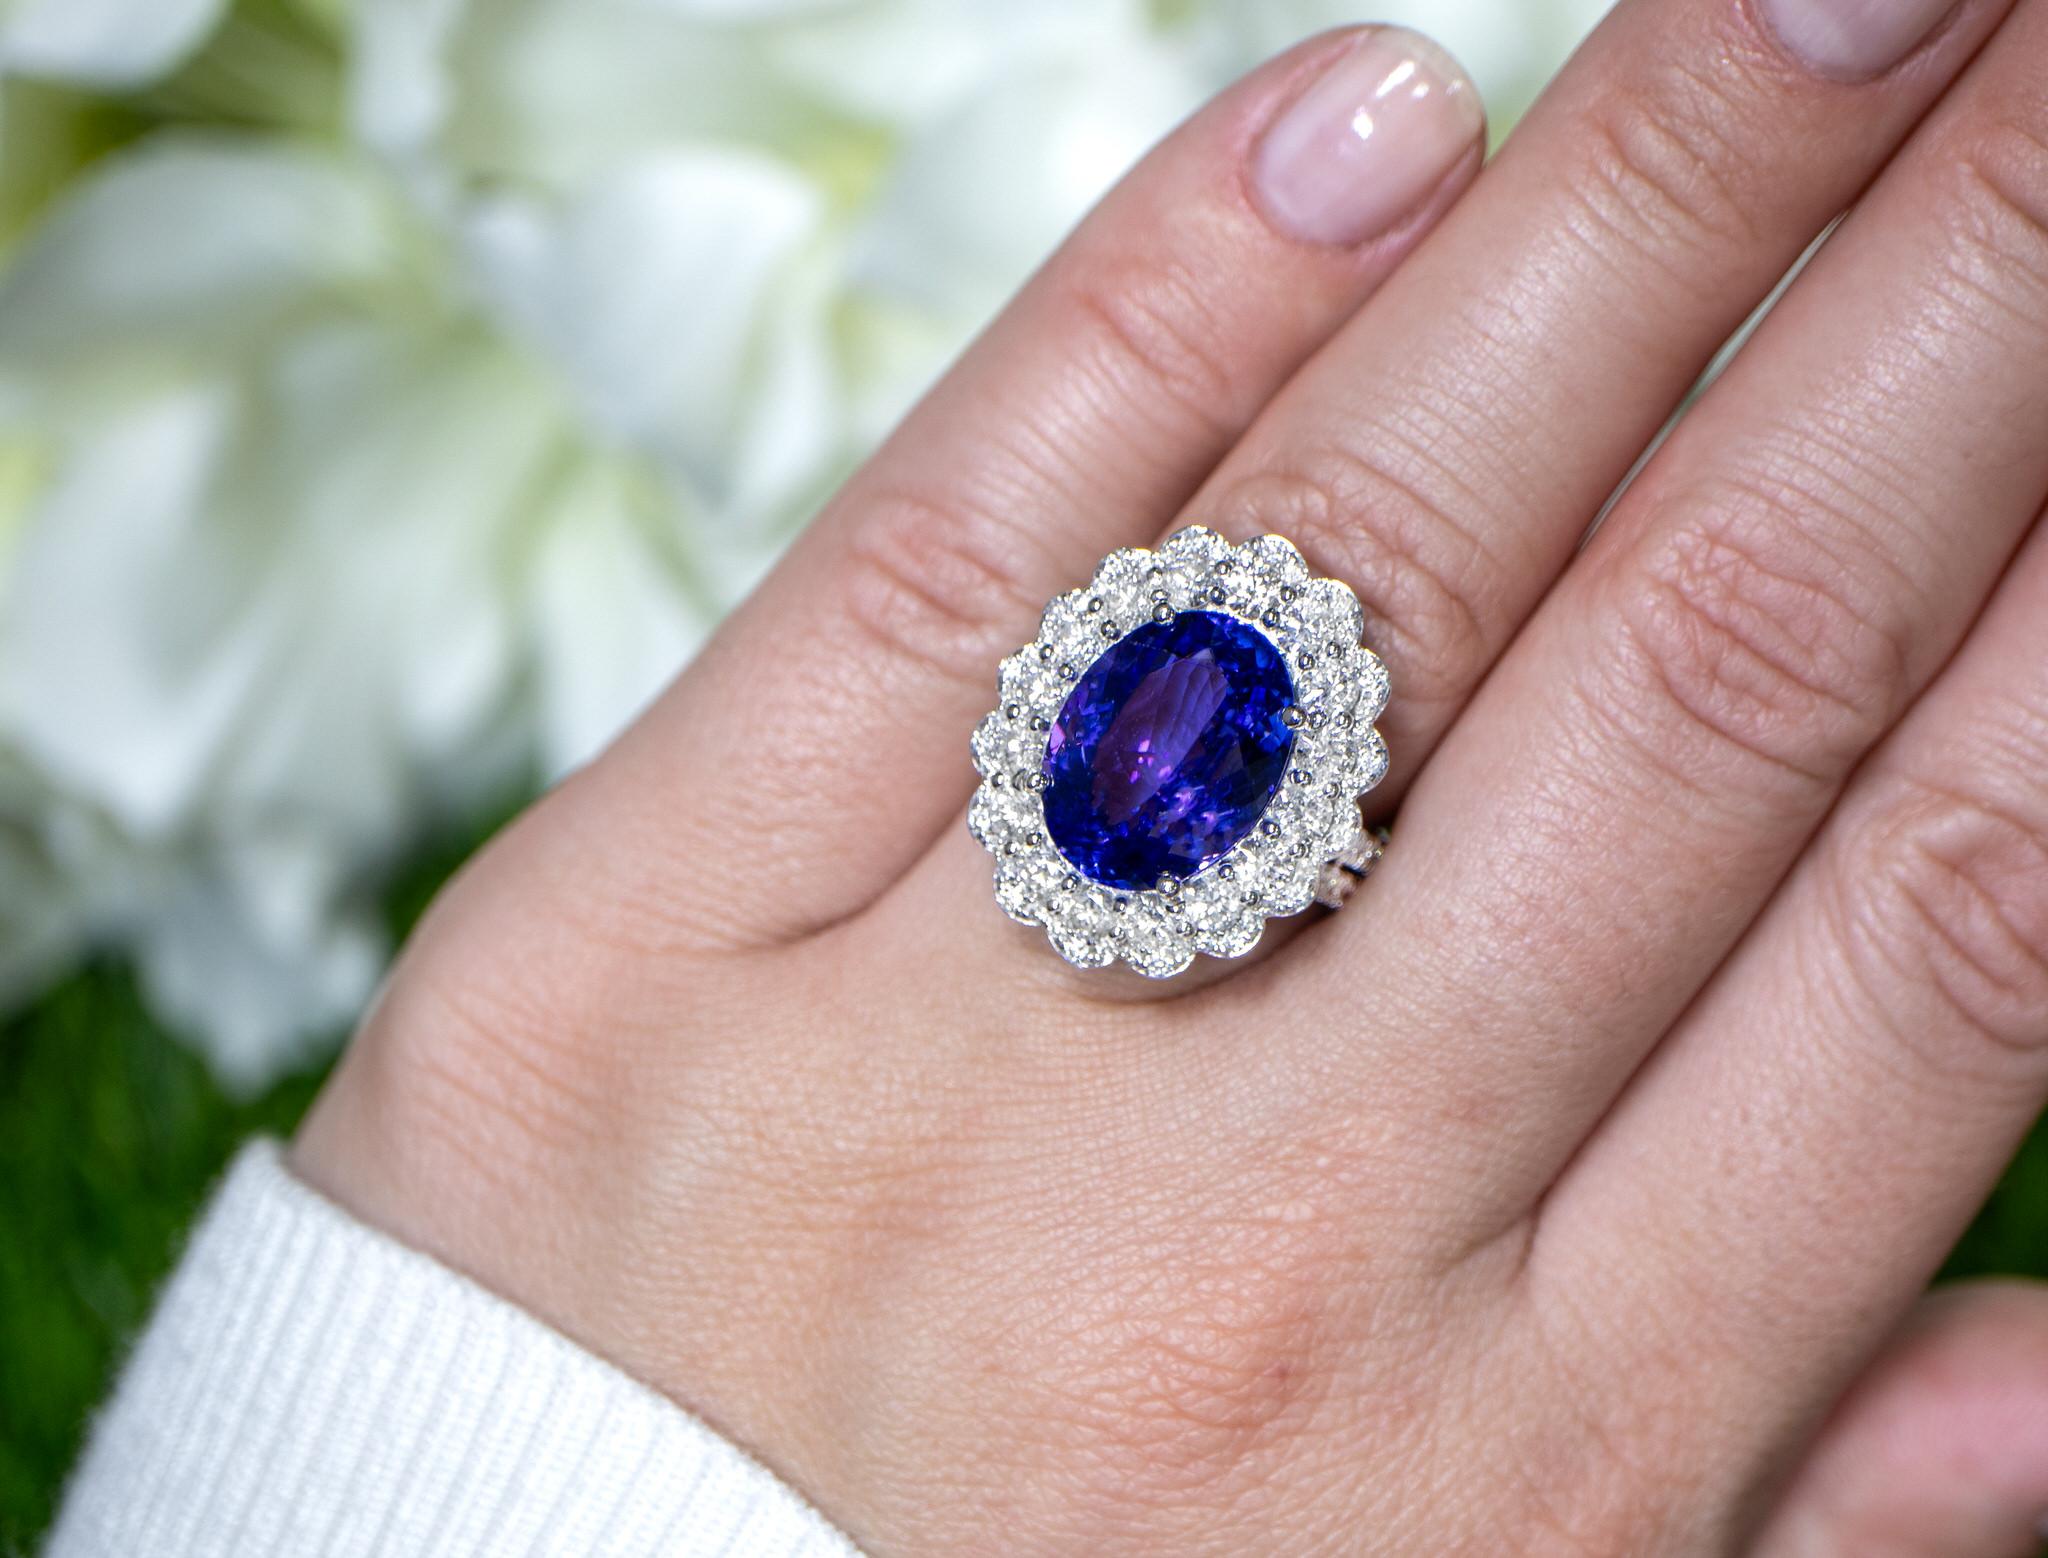 It comes with the Gemological Appraisal by GIA GG/AJP
All Gemstones are Natural
Tanzanite = 8.04 Carats
Diamonds = 2.12 Carats
Metal: 18K White Gold
Ring Size: 6.5* US
*It can be resized complimentary